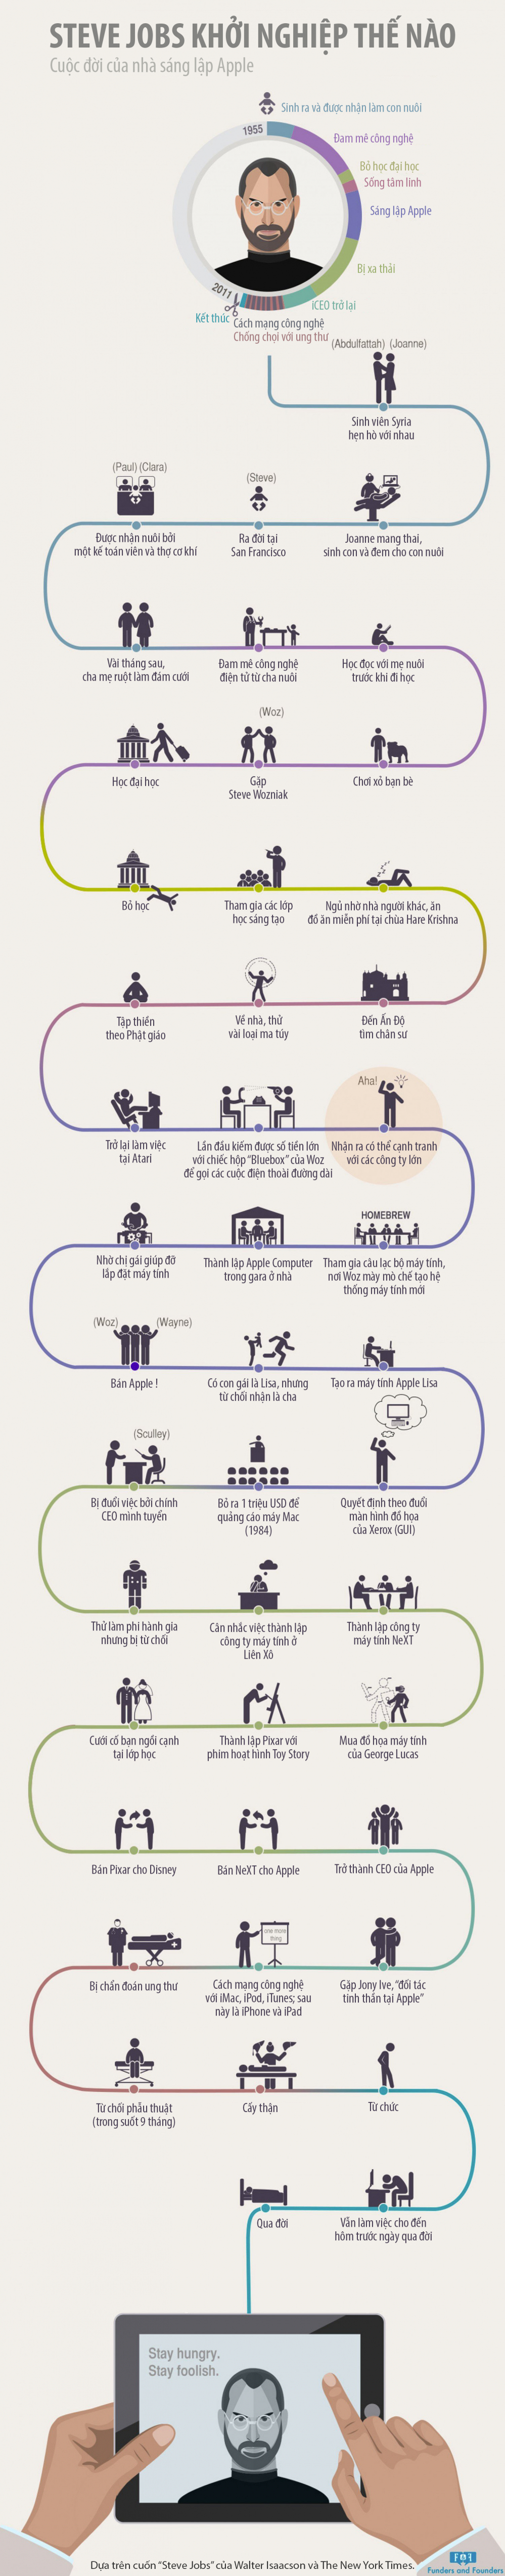 steve-jobs-pivotal-life-moments-infographic